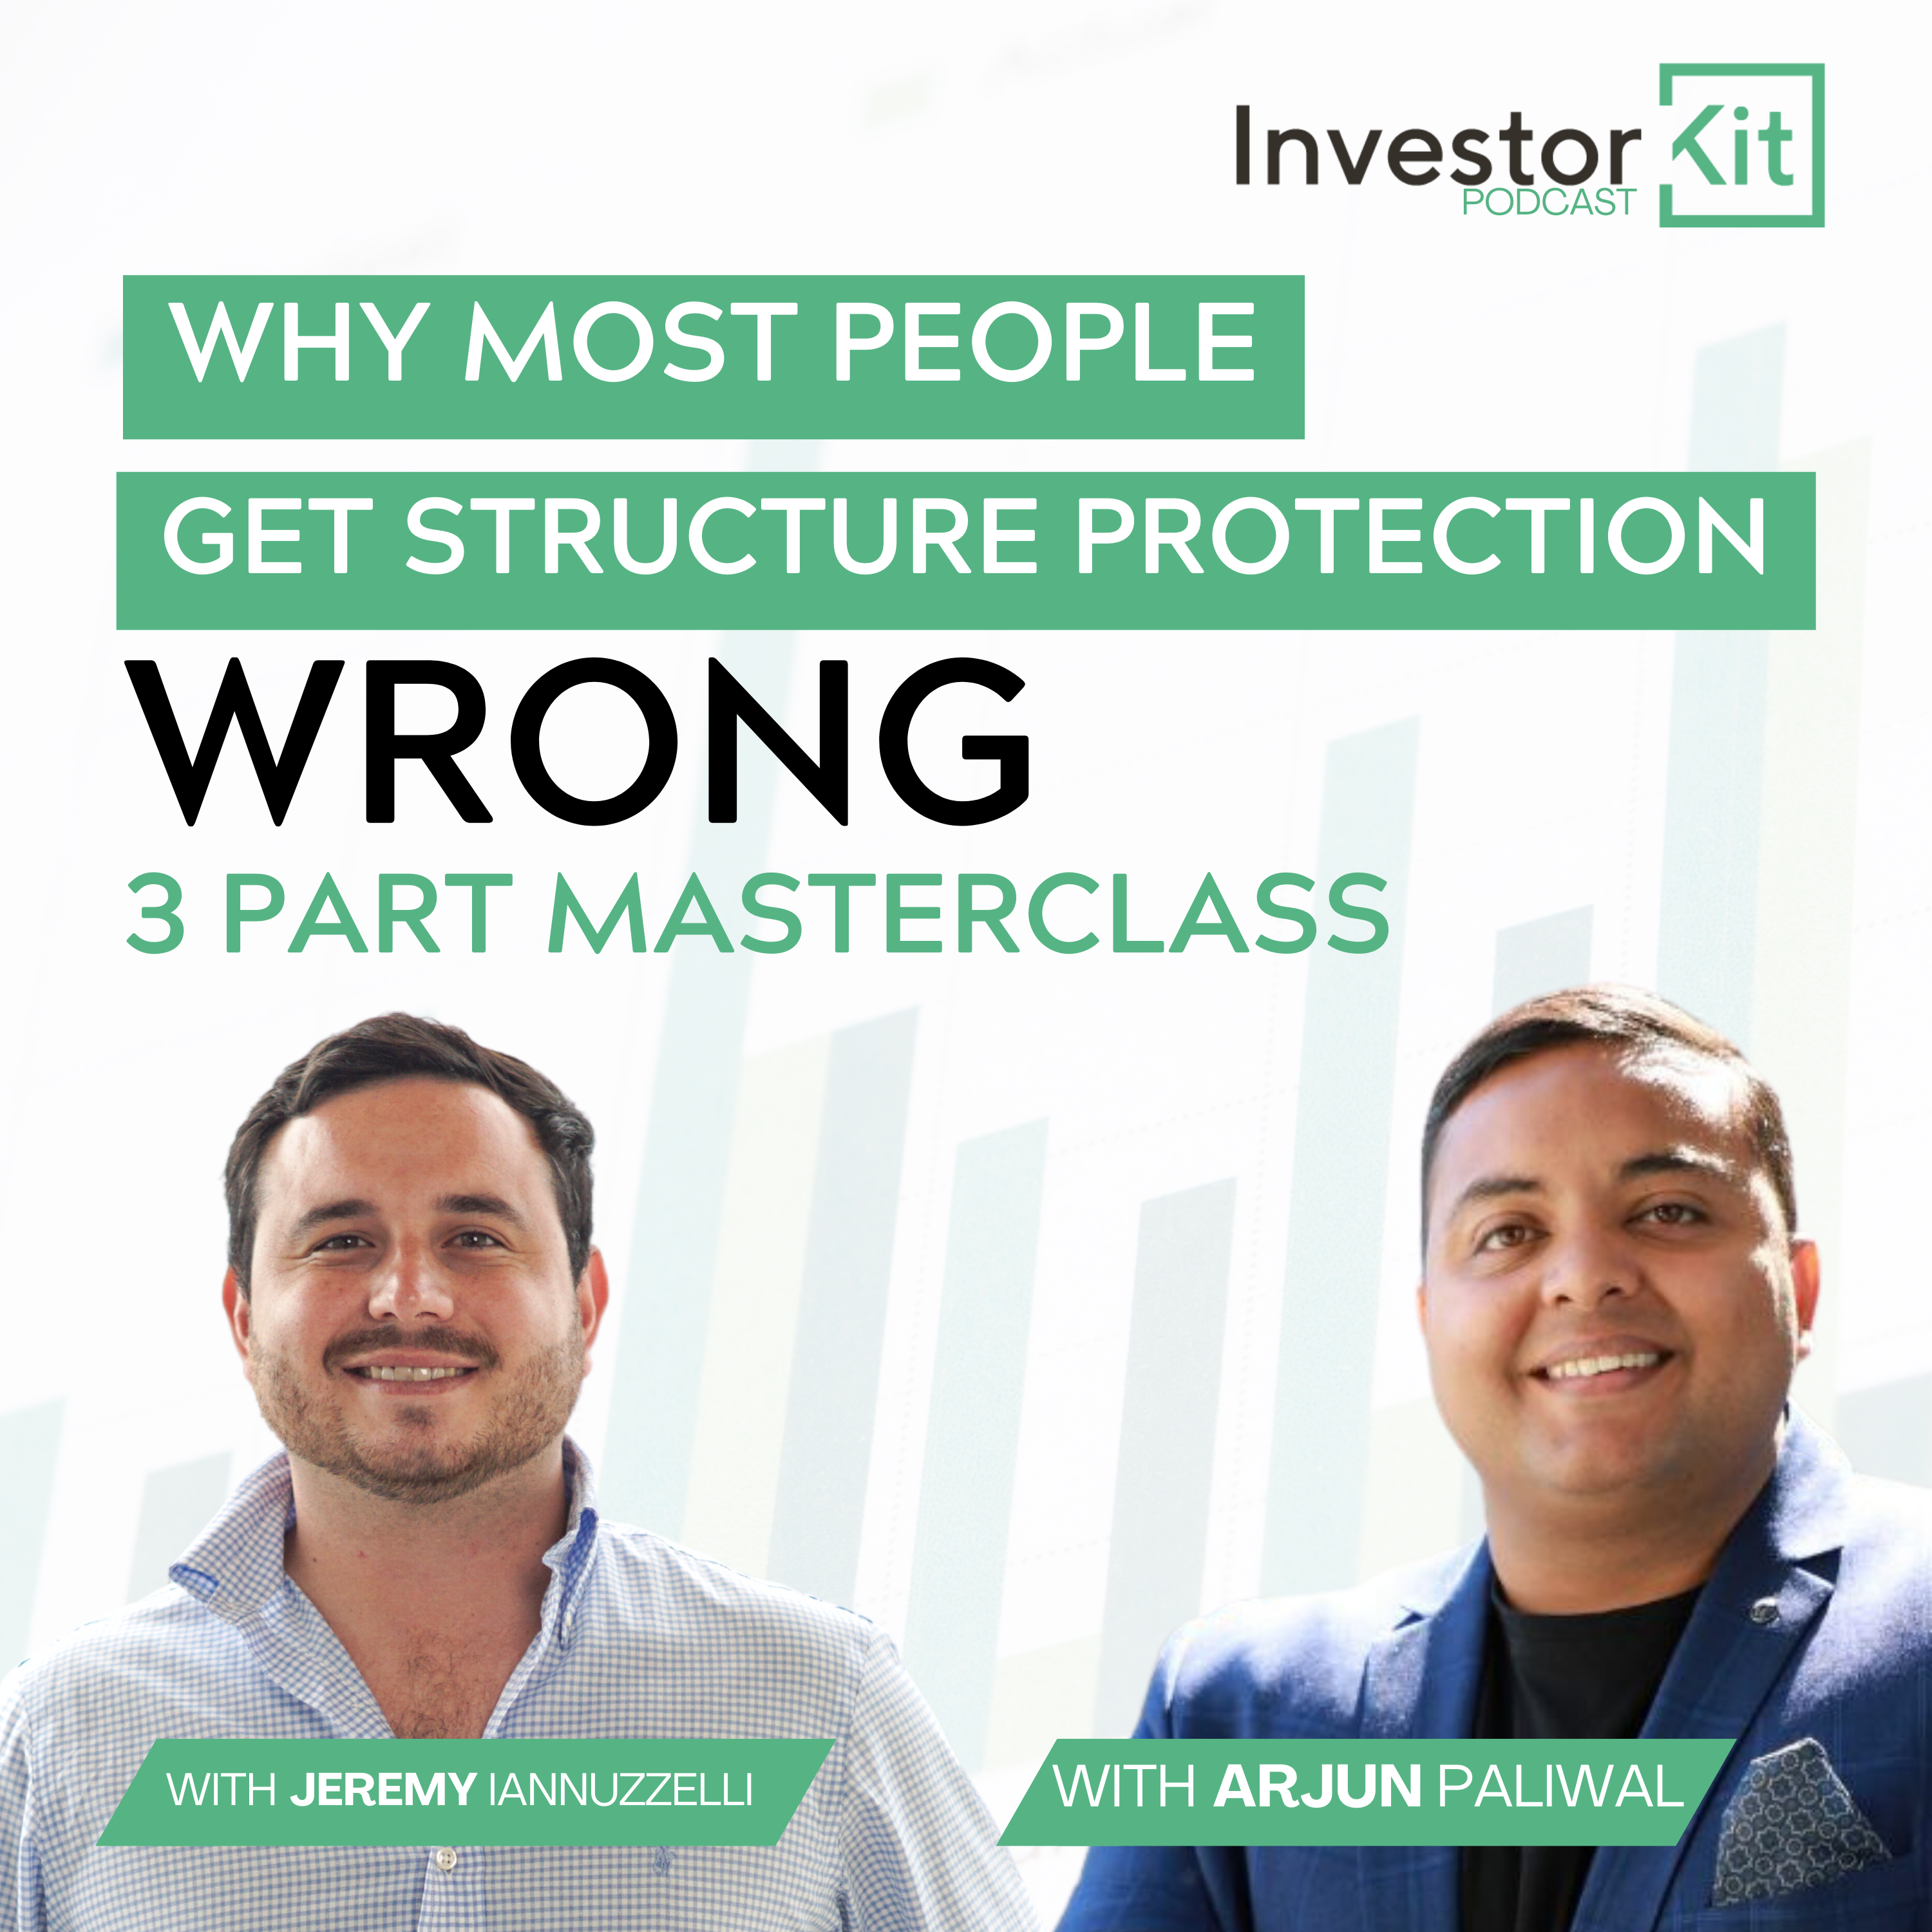 Why most people get structures protection wrong - Part 1 of a 3 Part Master Class - With Jeremy Iannuzzelli & Arjun Paliwal